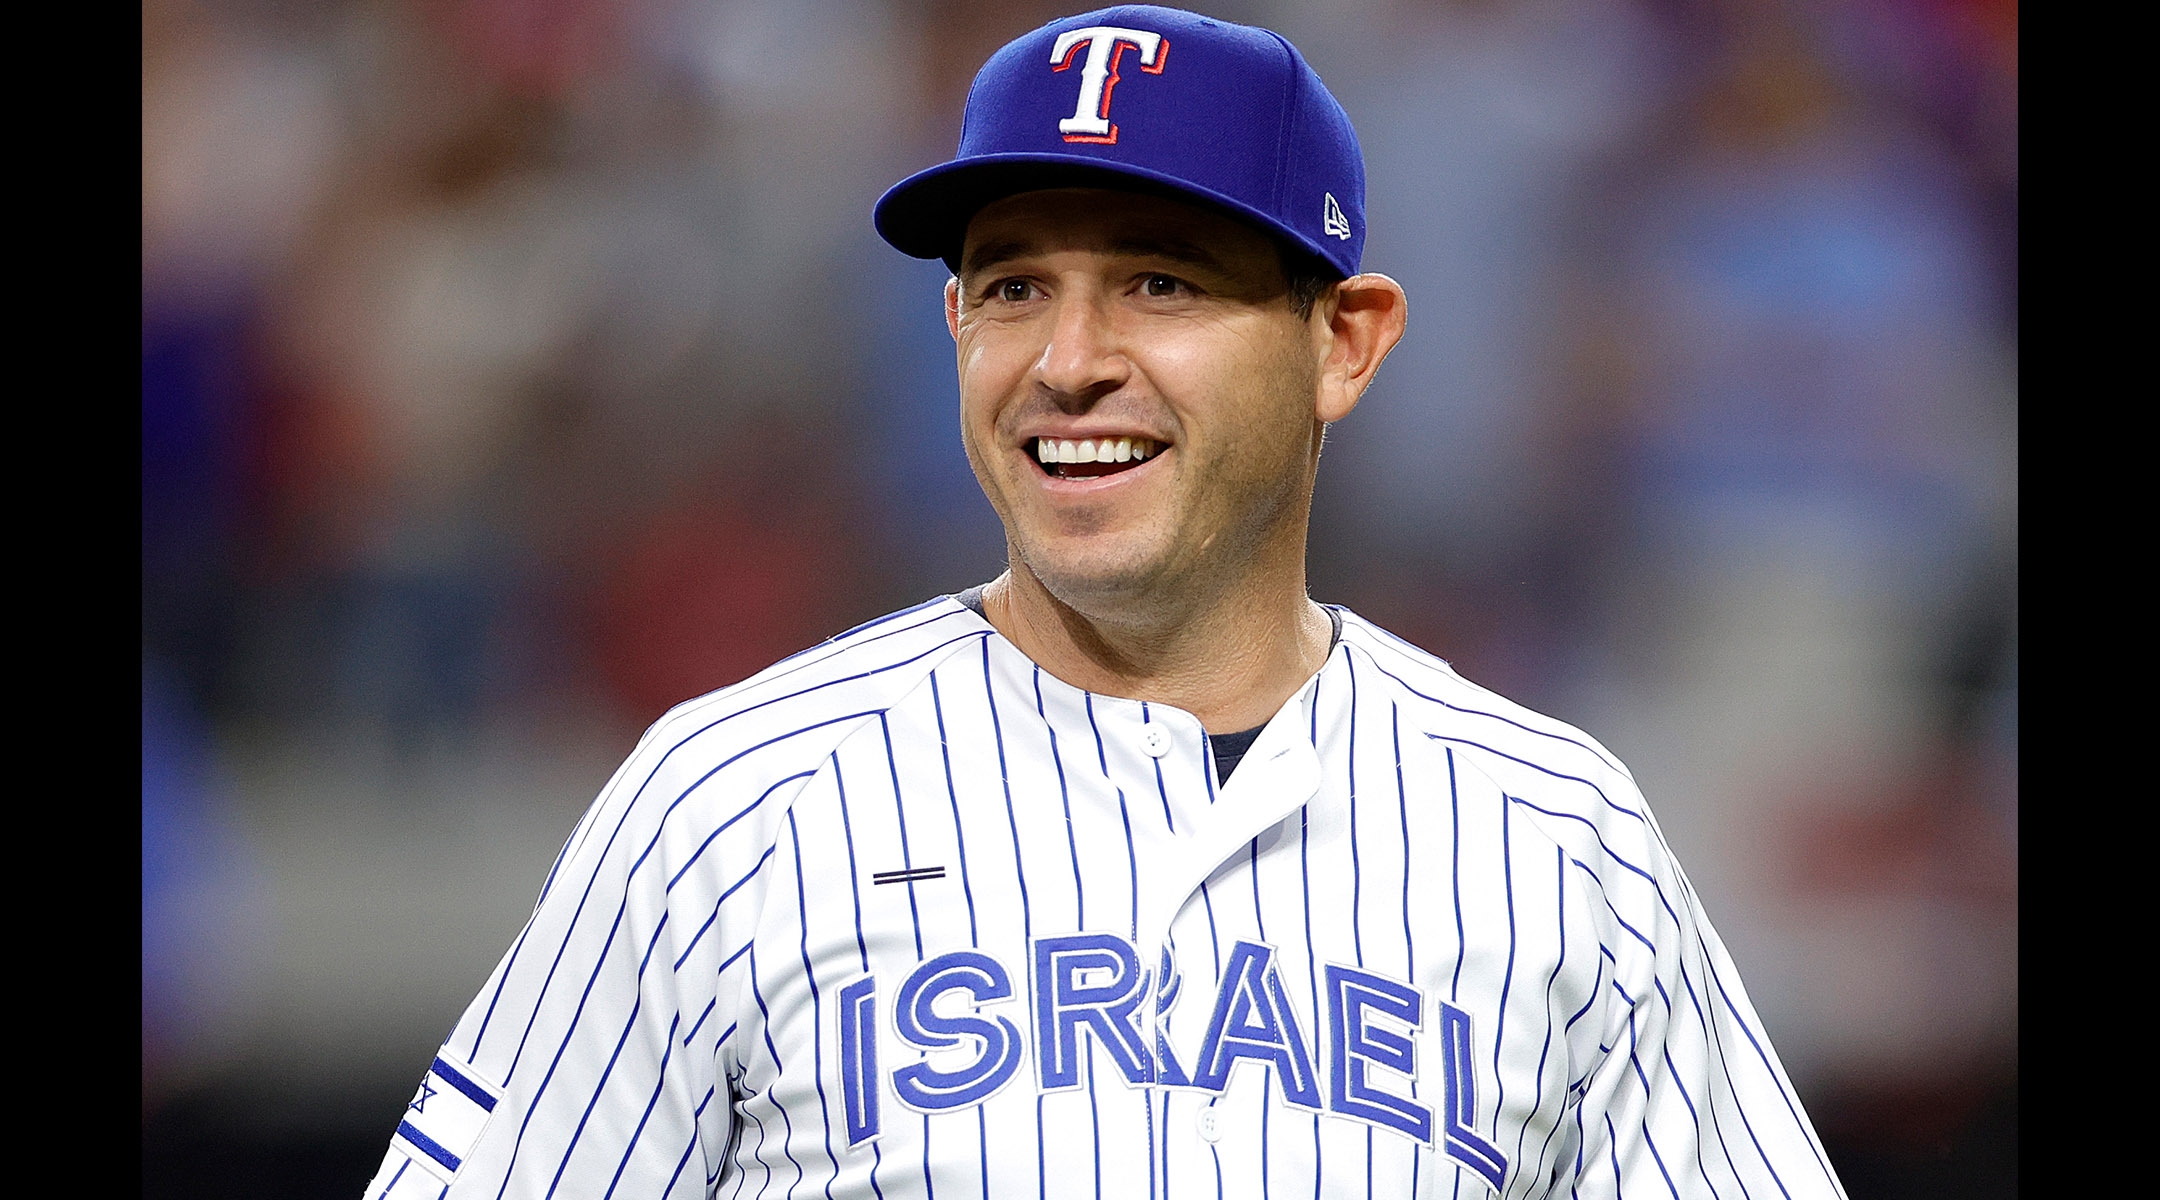 Jewish MLB players 'stand with Israel' in video condemning Hamas